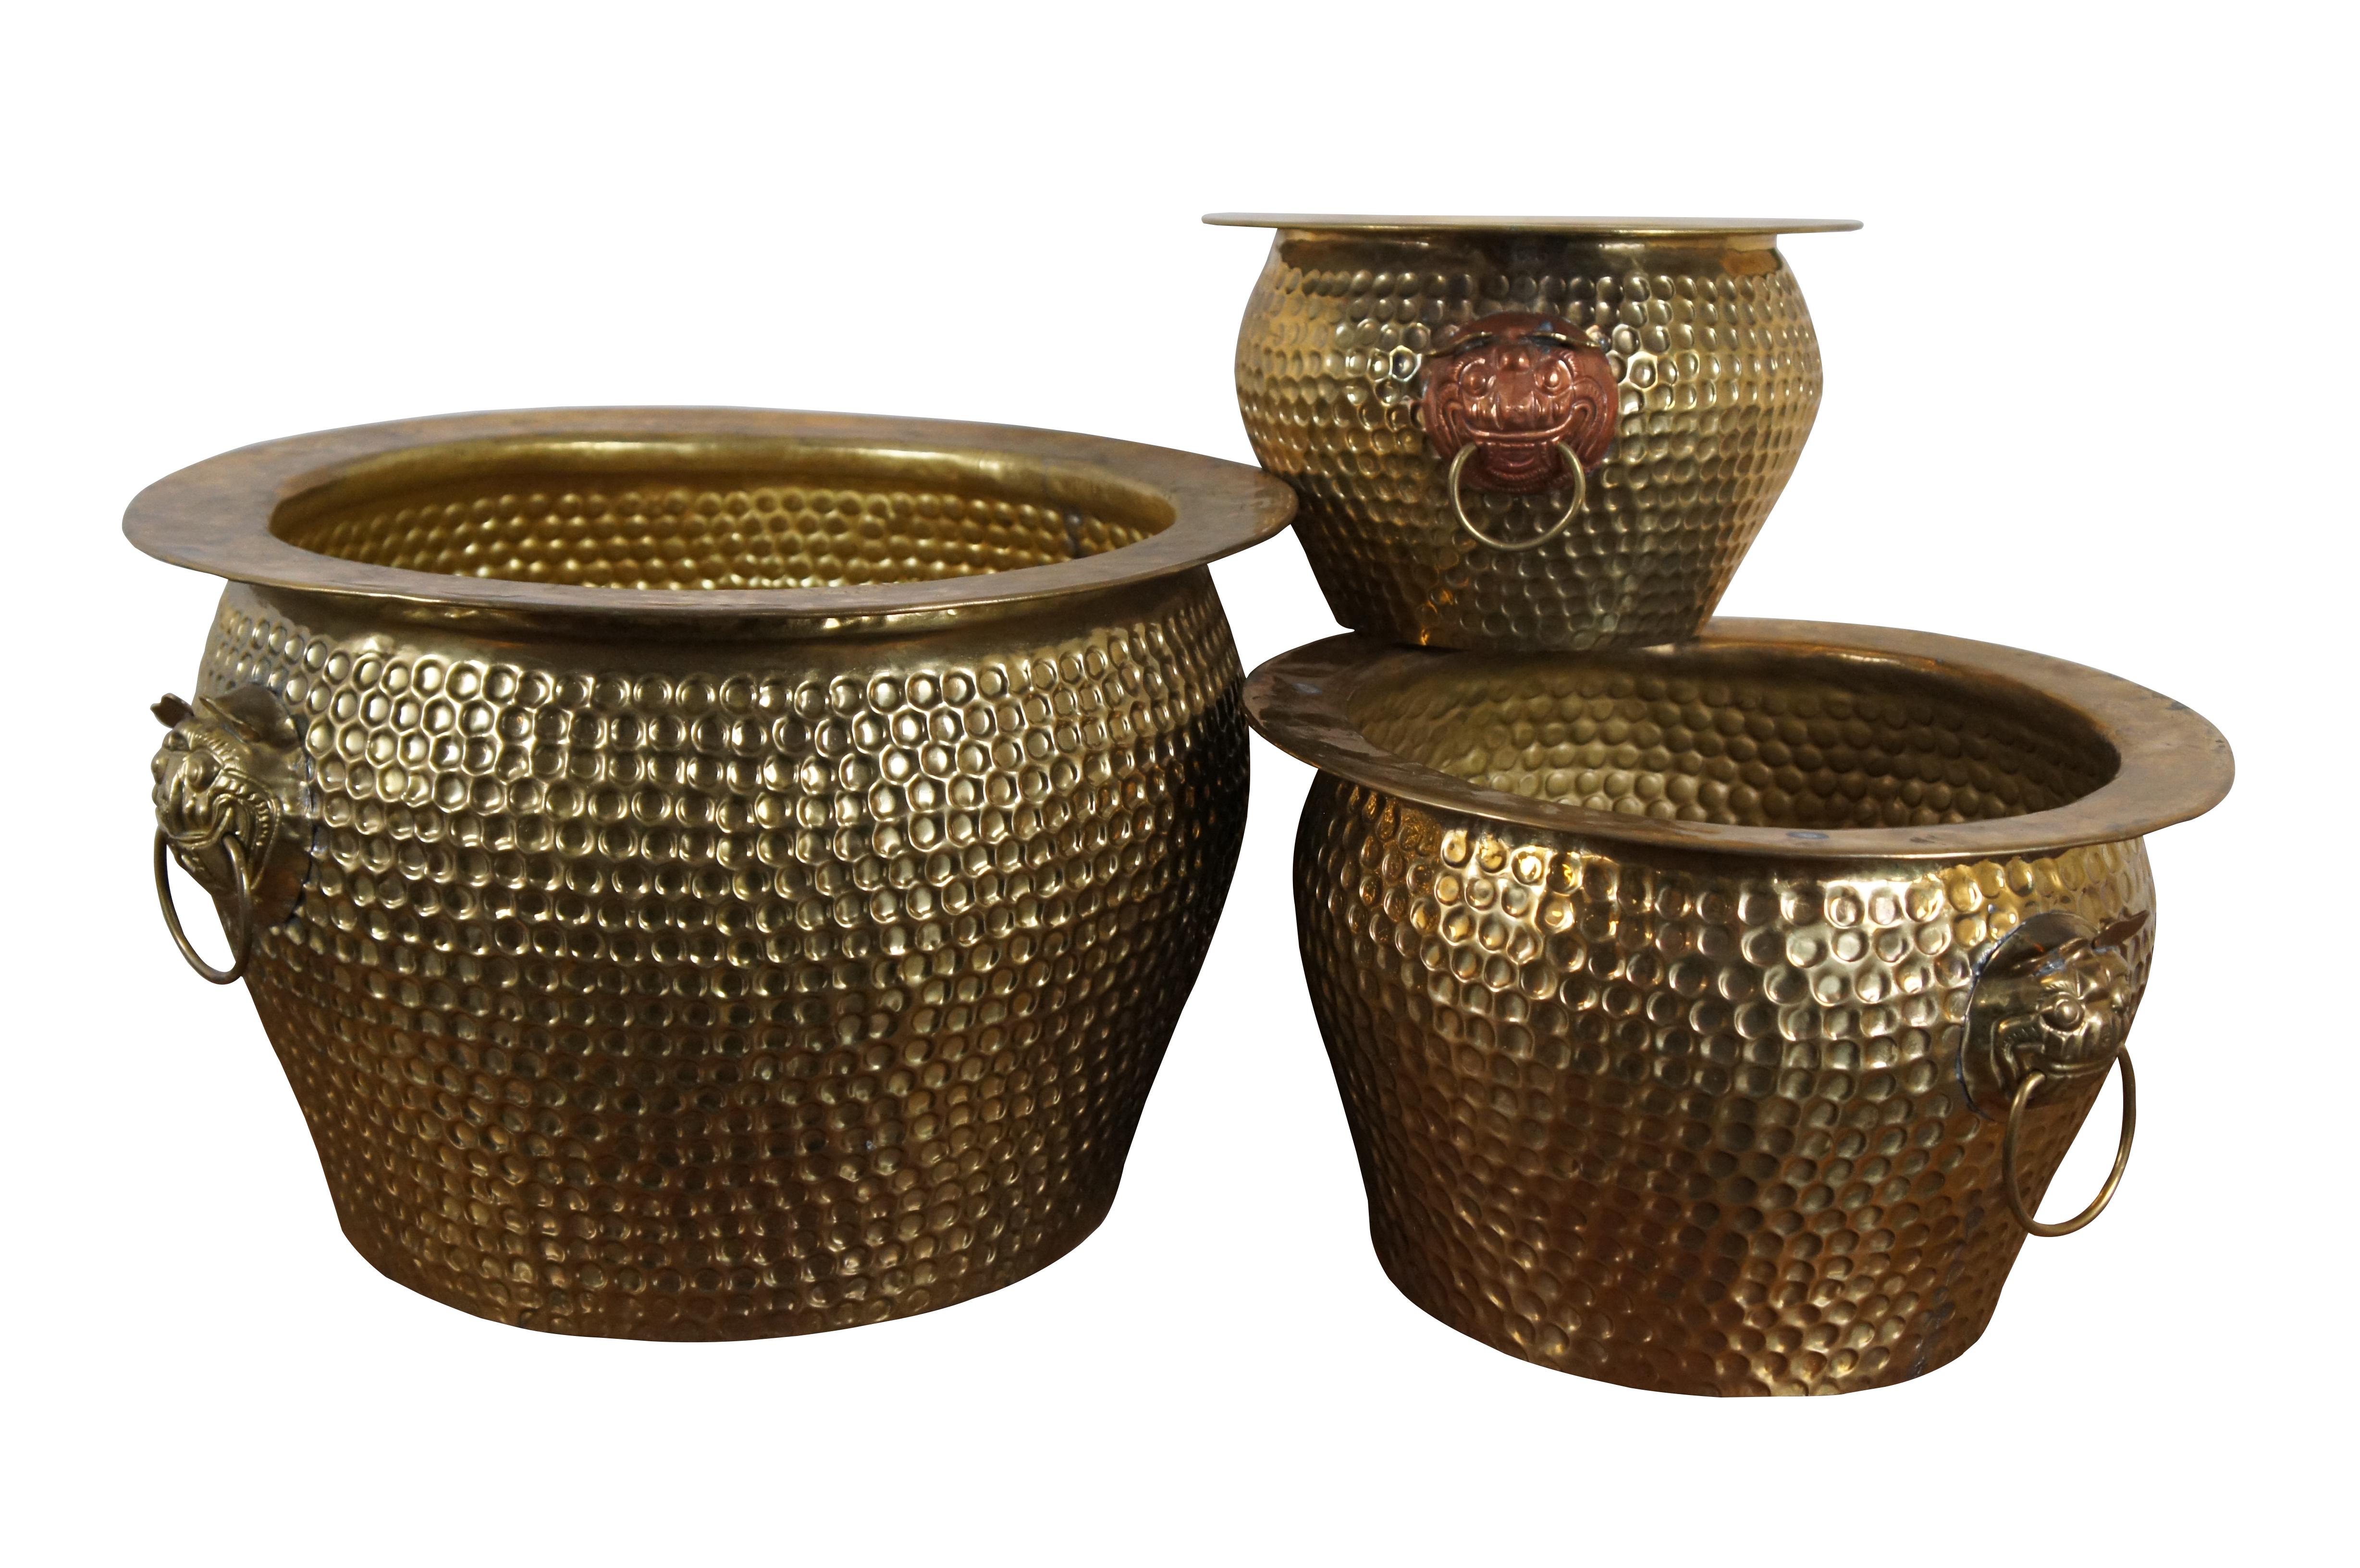 Three vintage Chinese nesting planters / jardinieres / cachepots with original box.  Made of brass featuring round form with hammered dovetailed body that features foo dog / dragon / lion ring handles.  The smallest one has copper ring